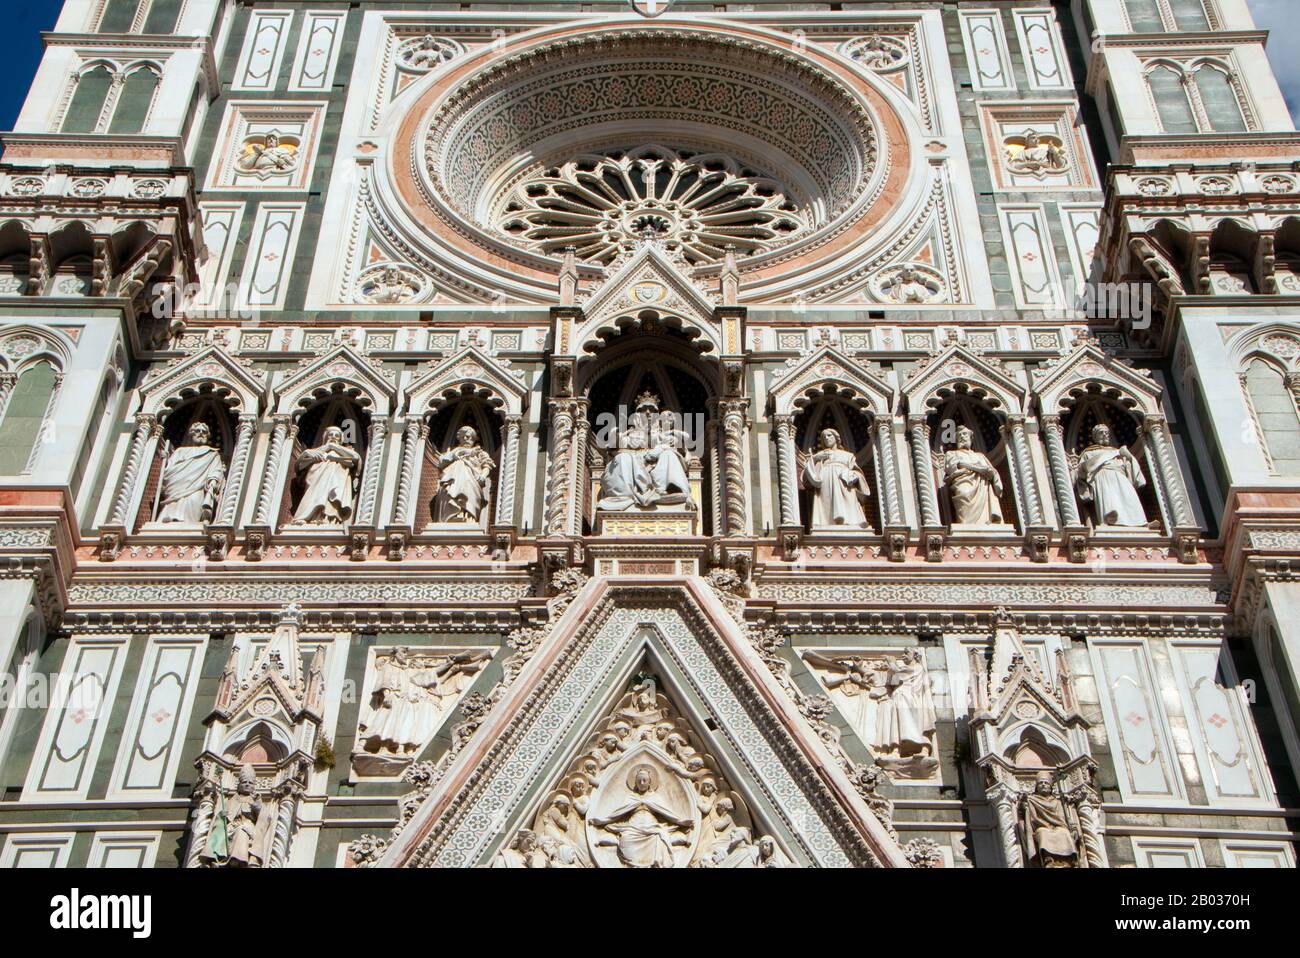 The Cattedrale di Santa Maria del Fiore (Cathedral of Saint Mary of the Flowers) is the main church of Florence. Il Duomo di Firenze, as it is ordinarily called, was begun in 1296 in the Gothic style with the design of Arnolfo di Cambio and completed structurally in 1436 with the dome engineered by Filippo Brunelleschi.  The exterior of the basilica is faced with polychrome marble panels in various shades of green and pink bordered by white and has an elaborate 19th-century Gothic Revival façade by Emilio De Fabris.  The cathedral complex, located in Piazza del Duomo, includes the Baptistery a Stock Photo